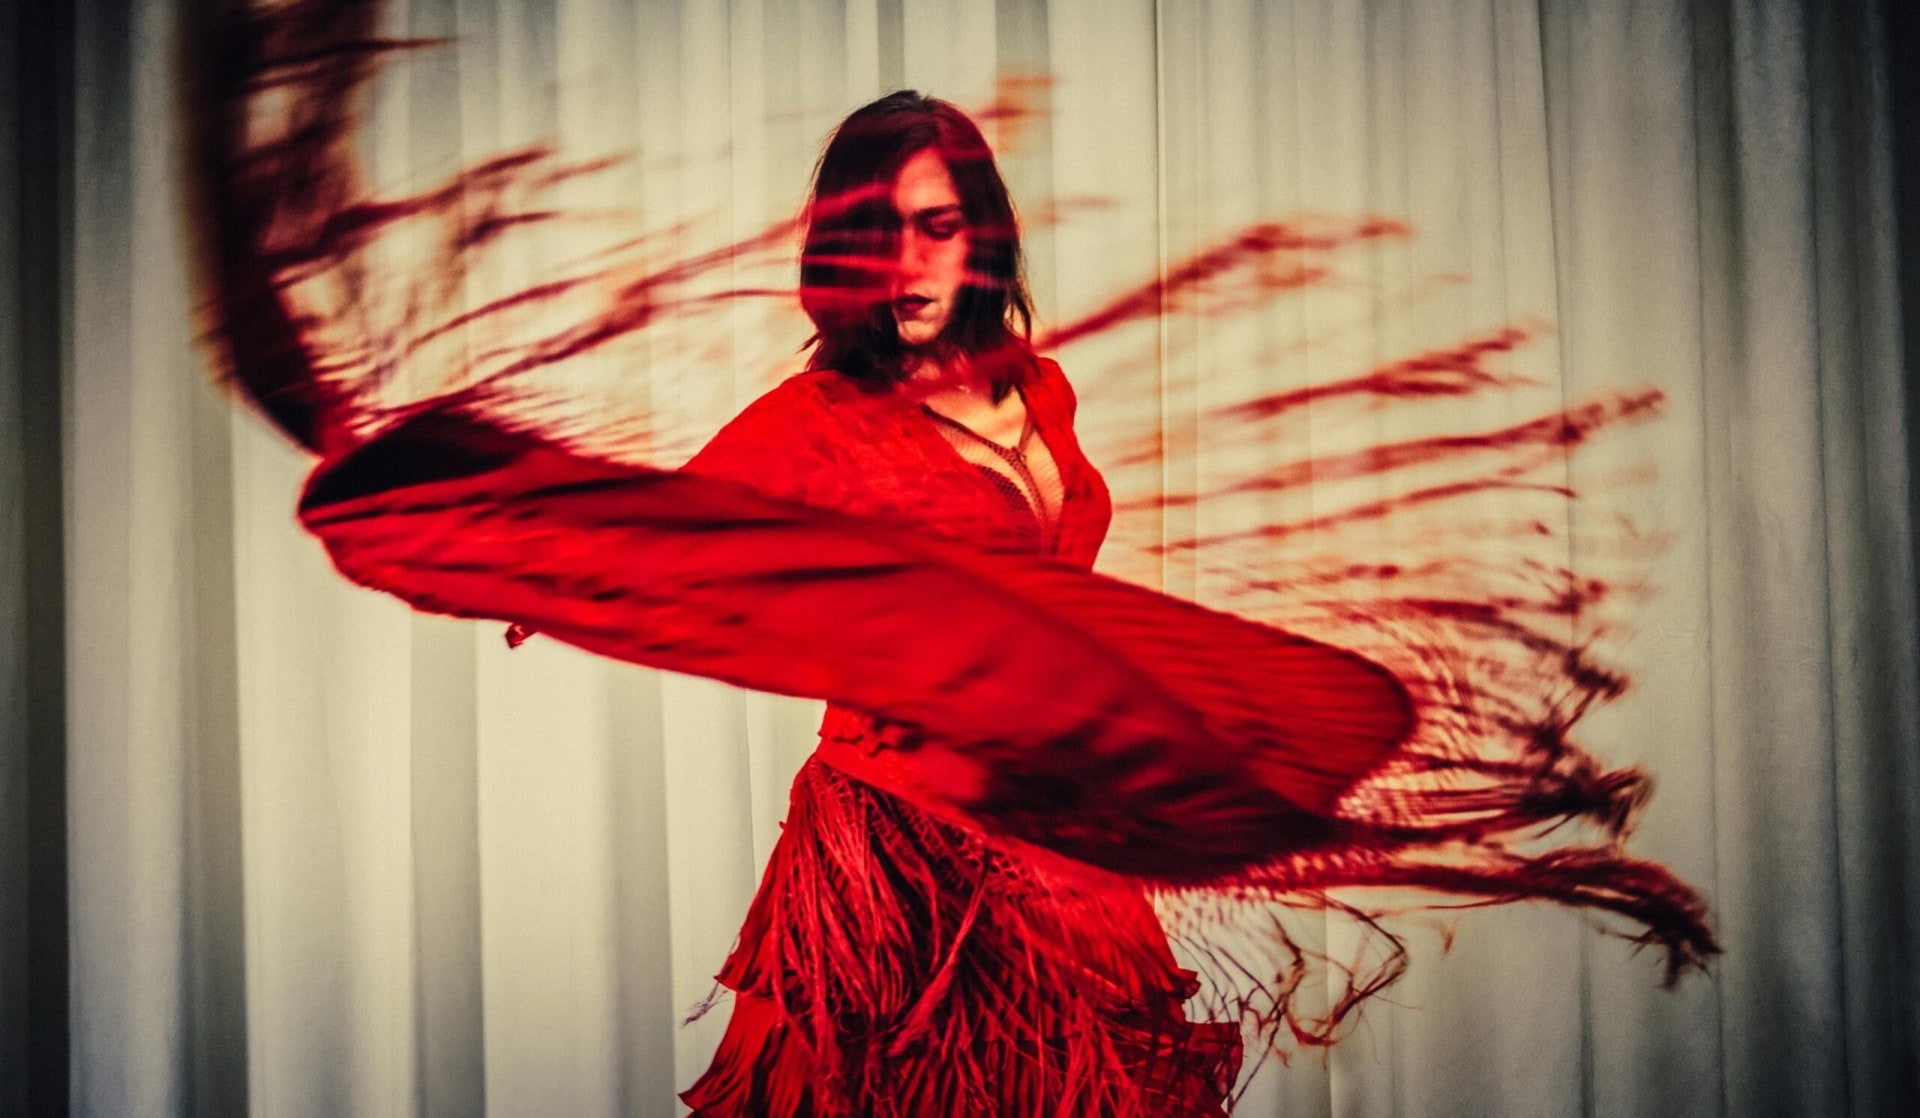 woman in fringed red dress spinning so the fringe is flying